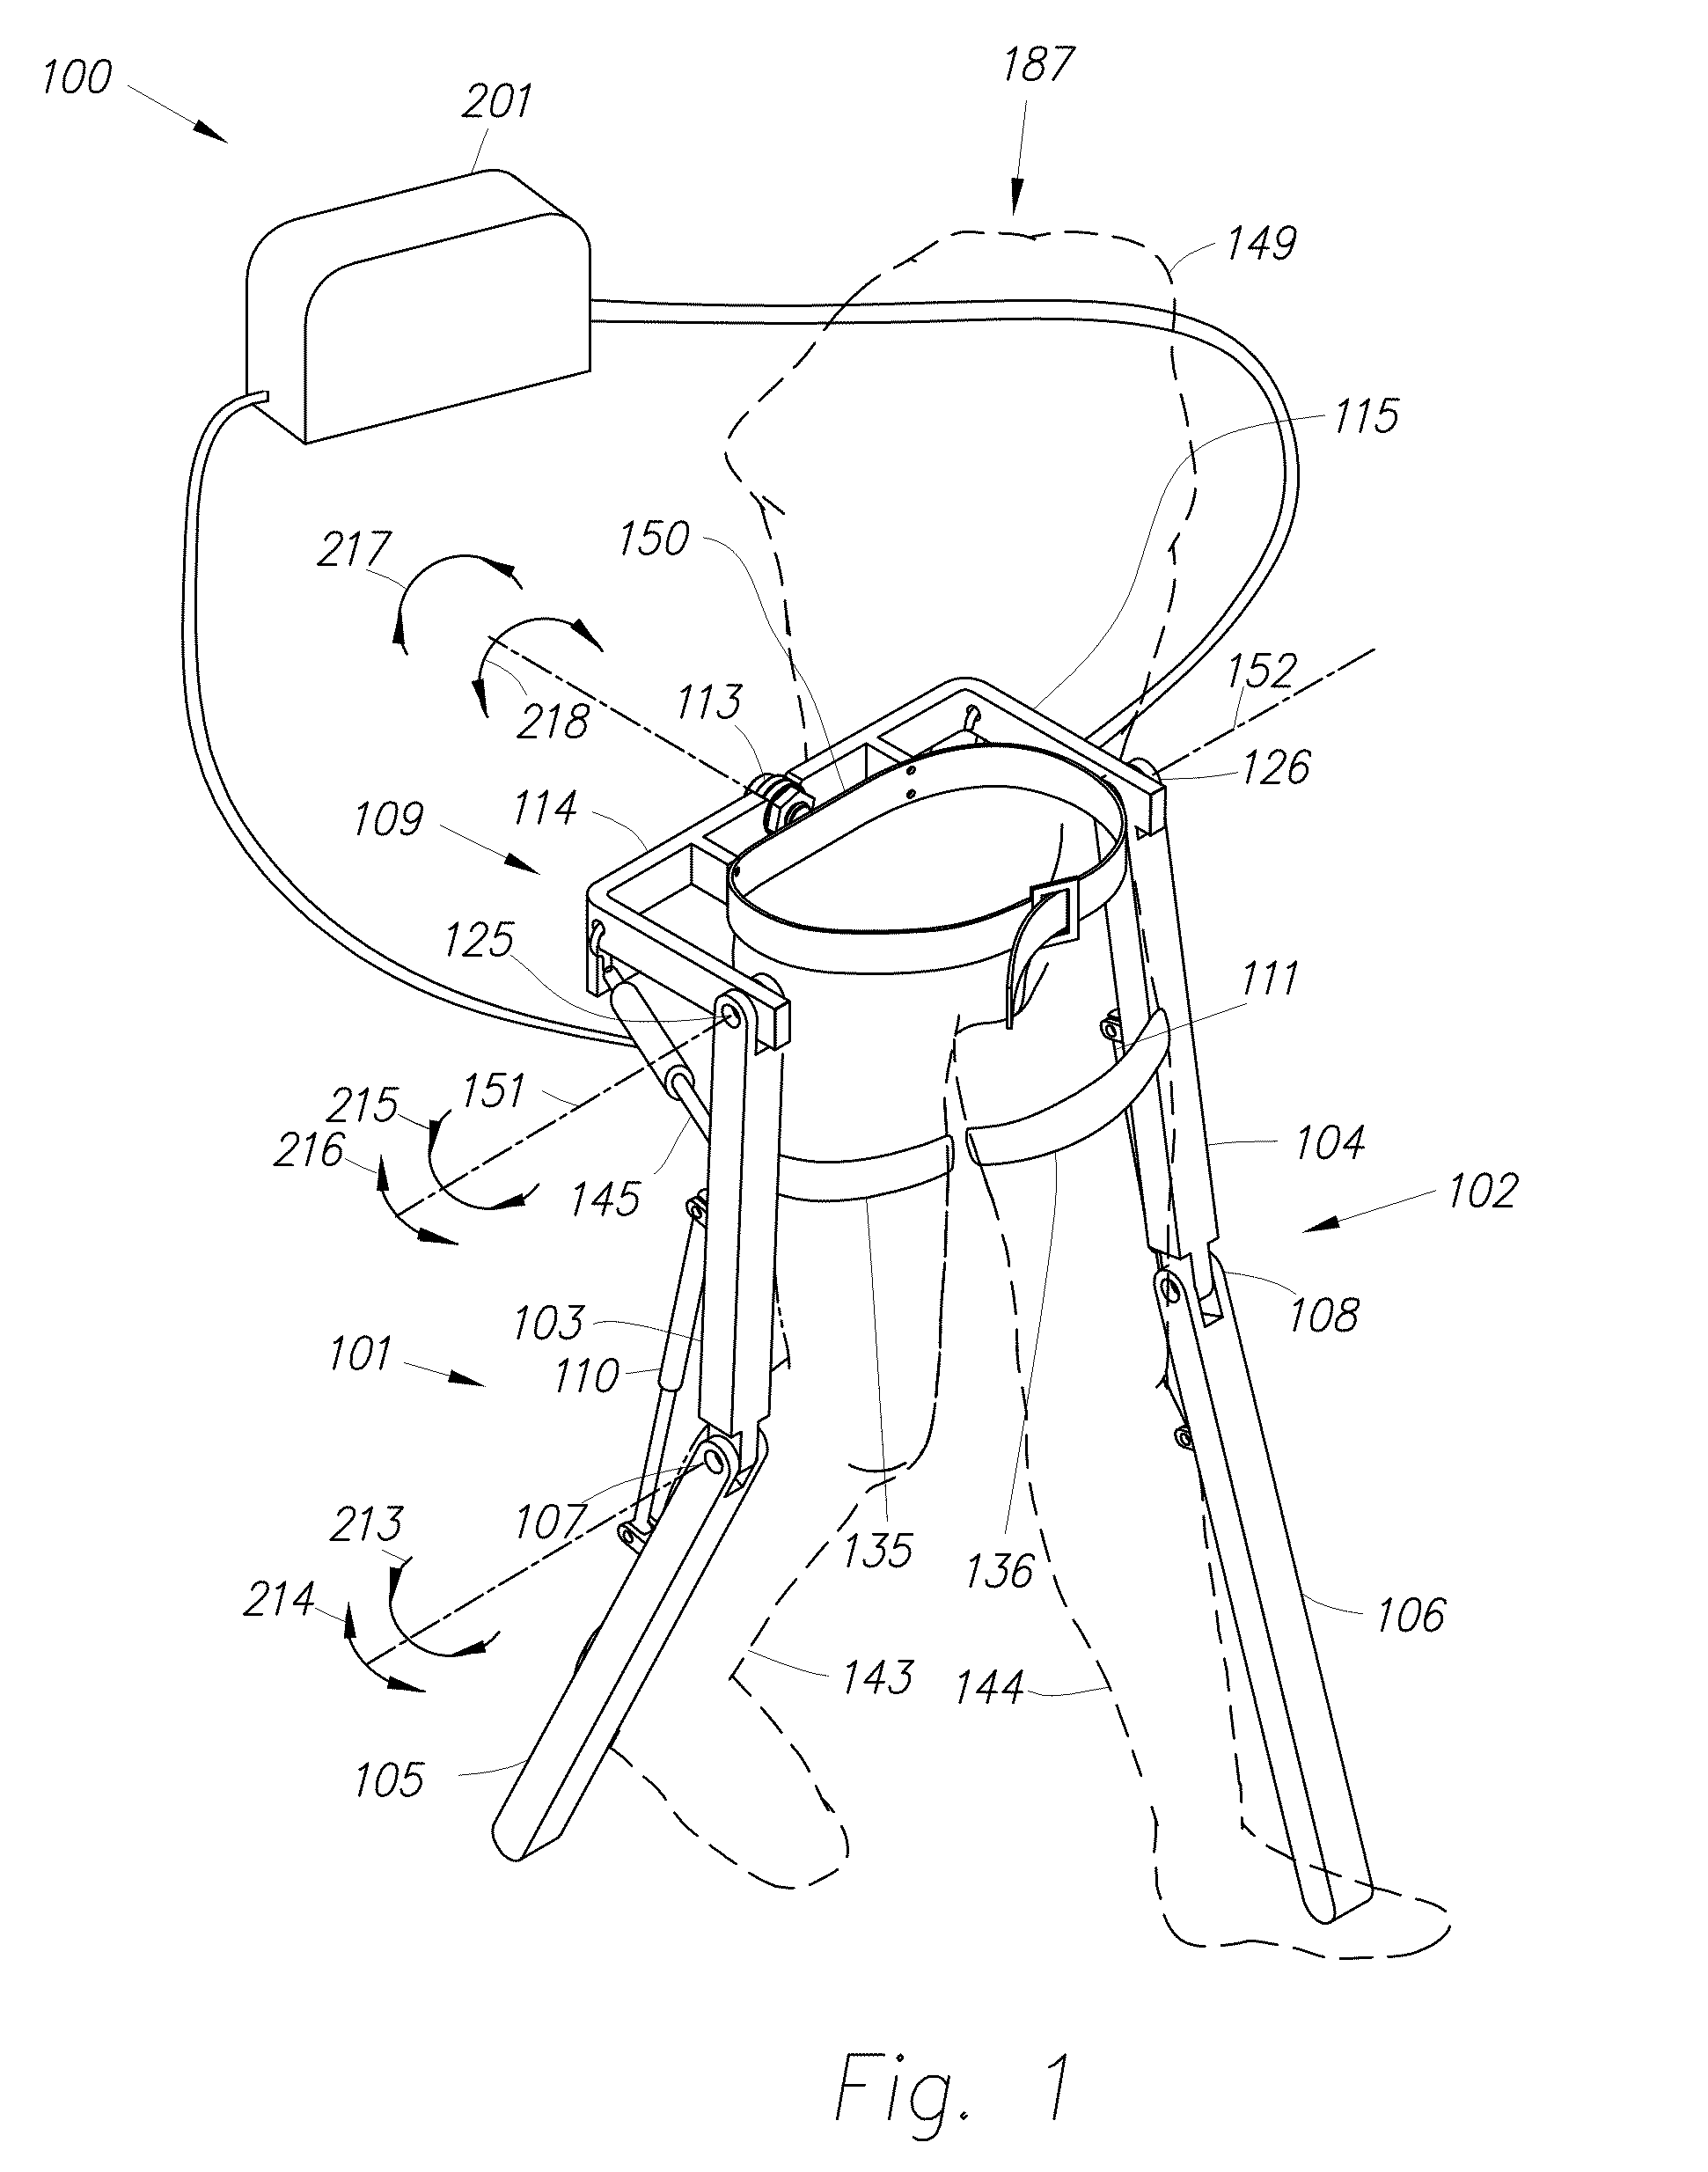 Device and Method for Decreasing Oxygen Consumption of a Person During Steady Walking by Use of a Load-Carrying Exoskeleton